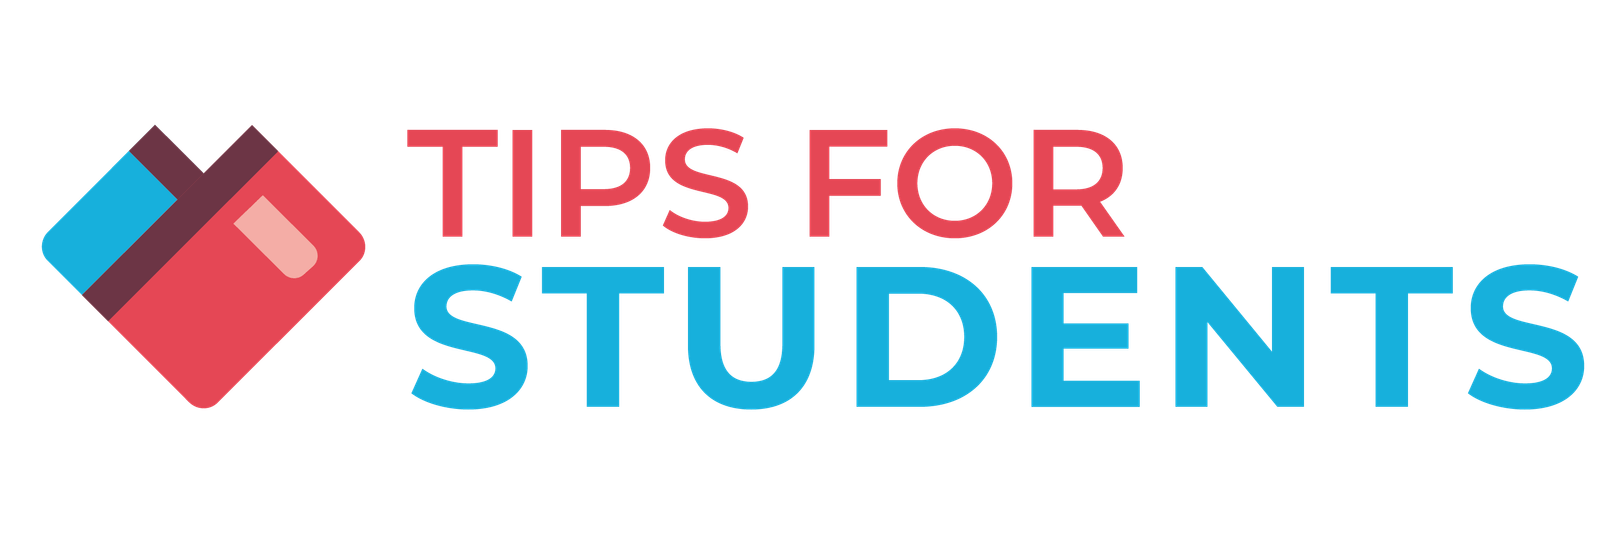 Tips for students logo